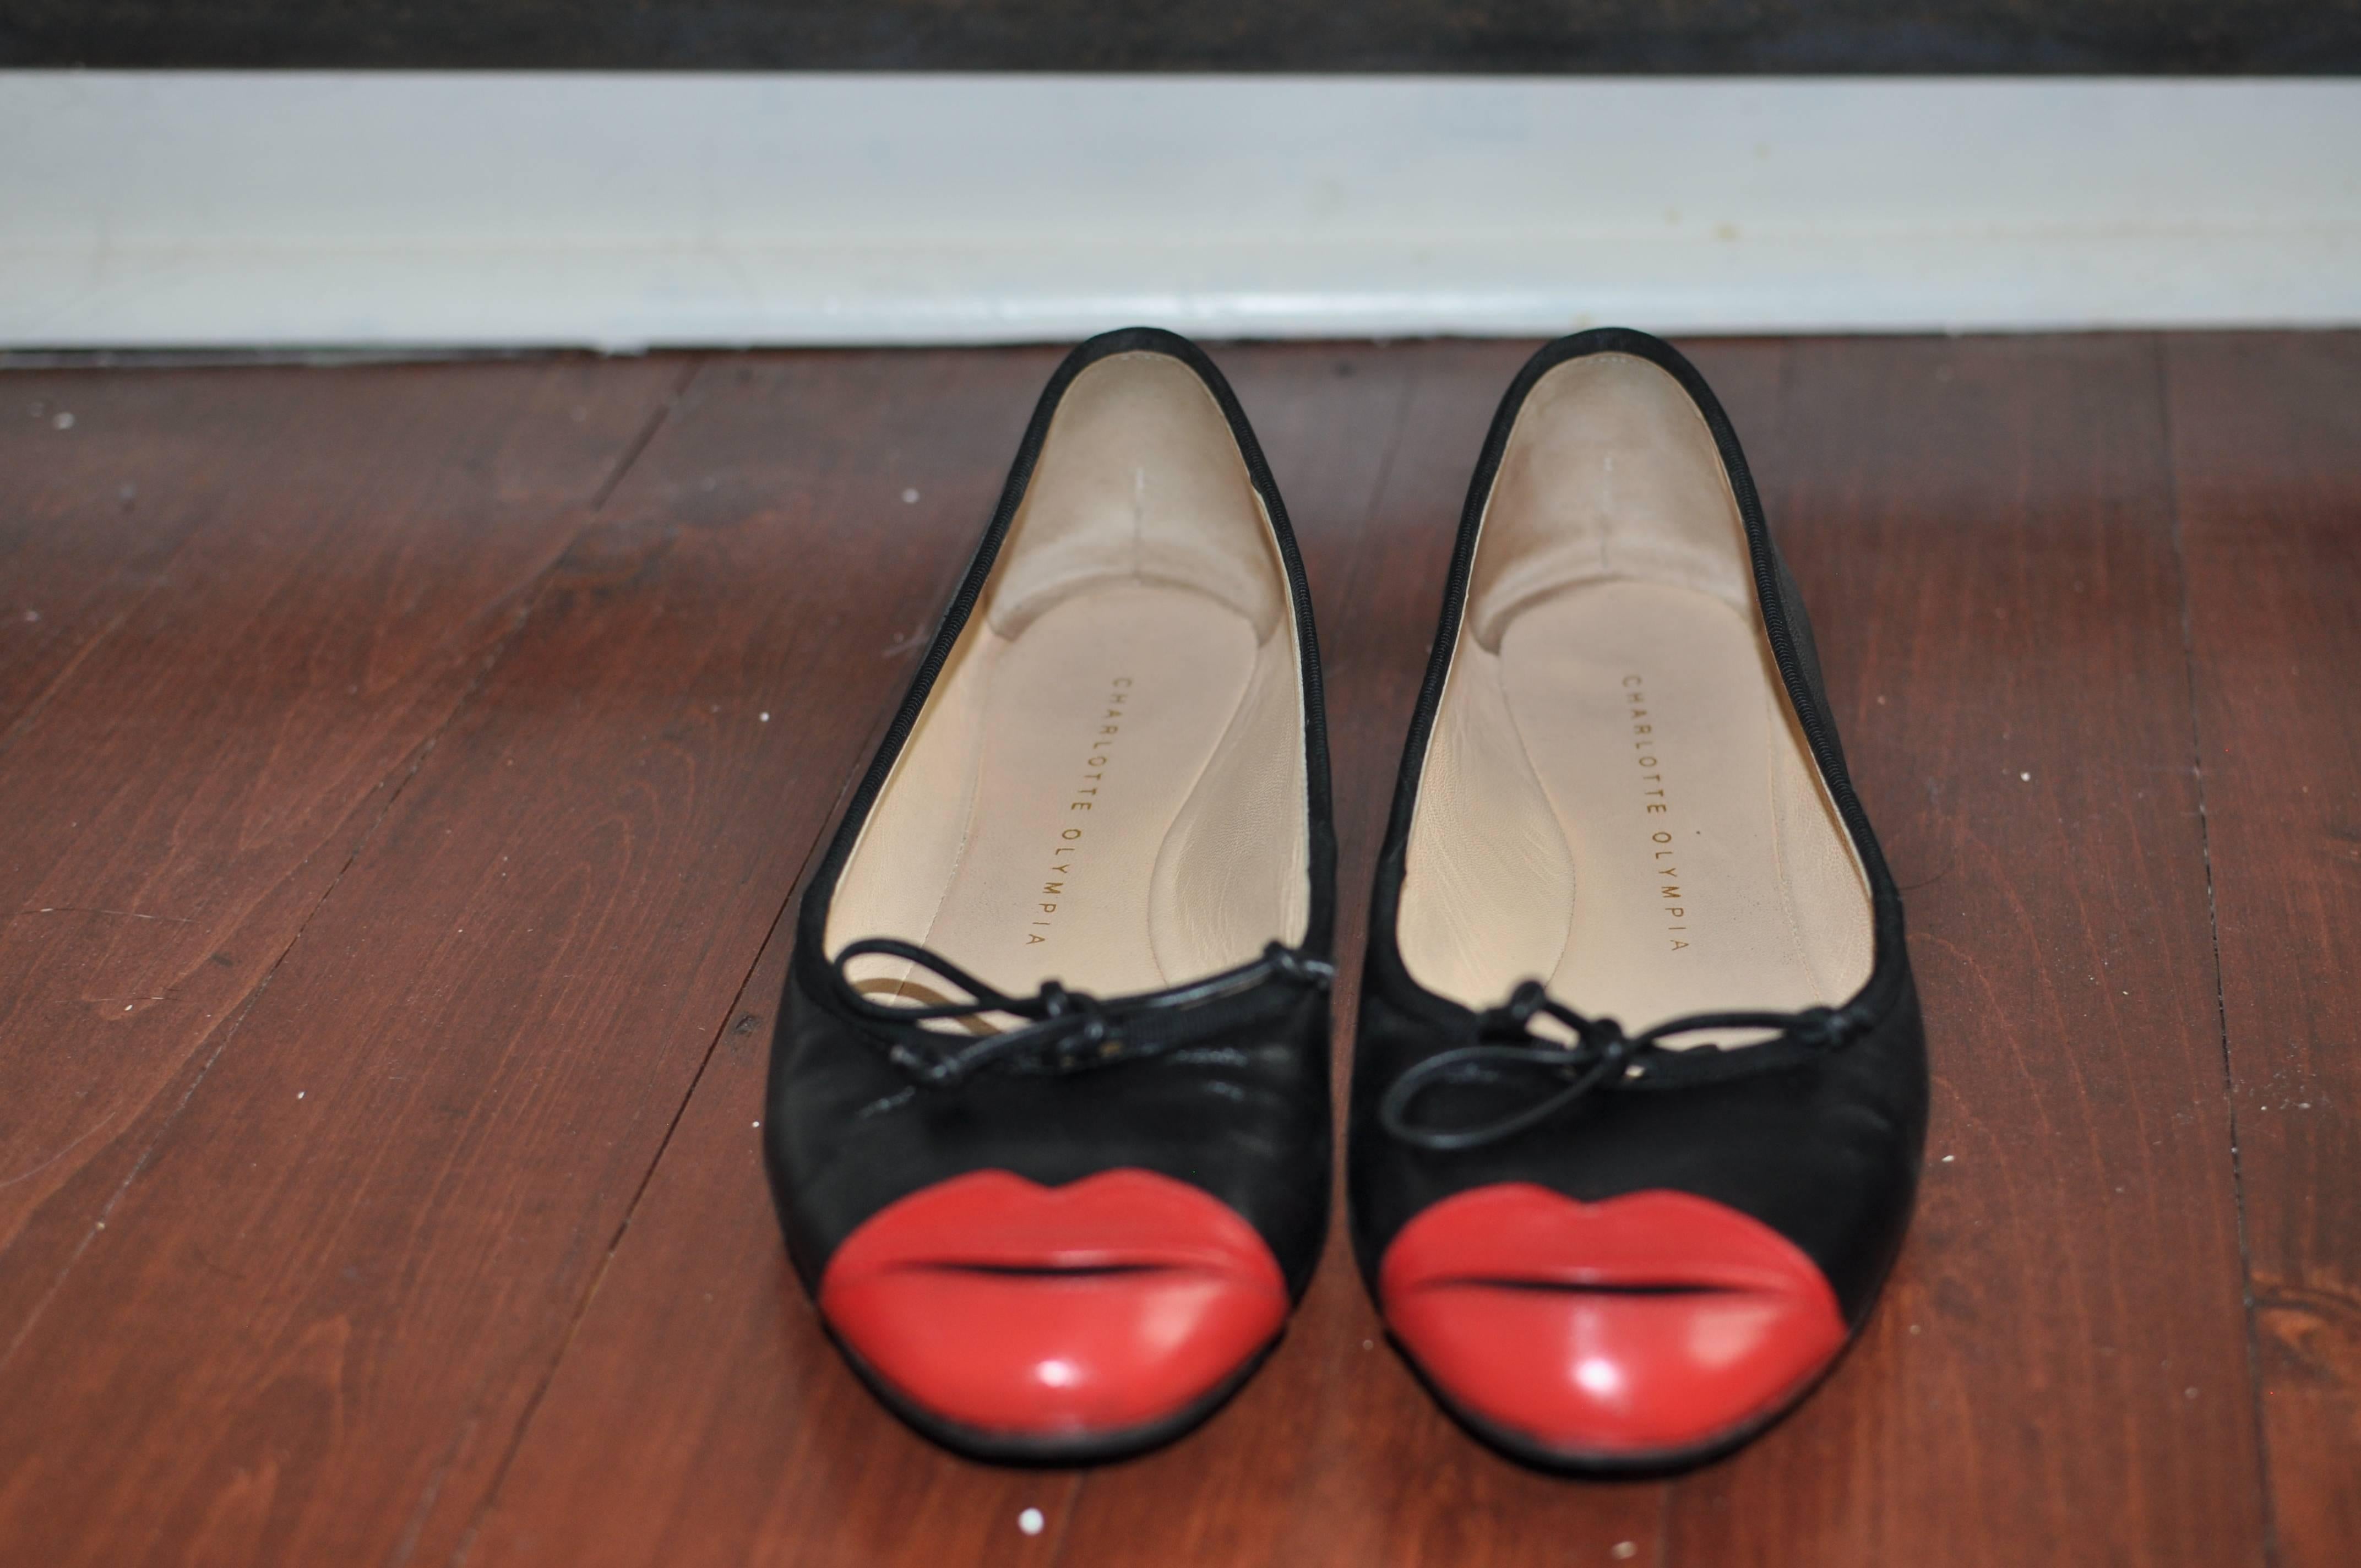 Black leather flats with red lip applique, these round toed shoes have .5